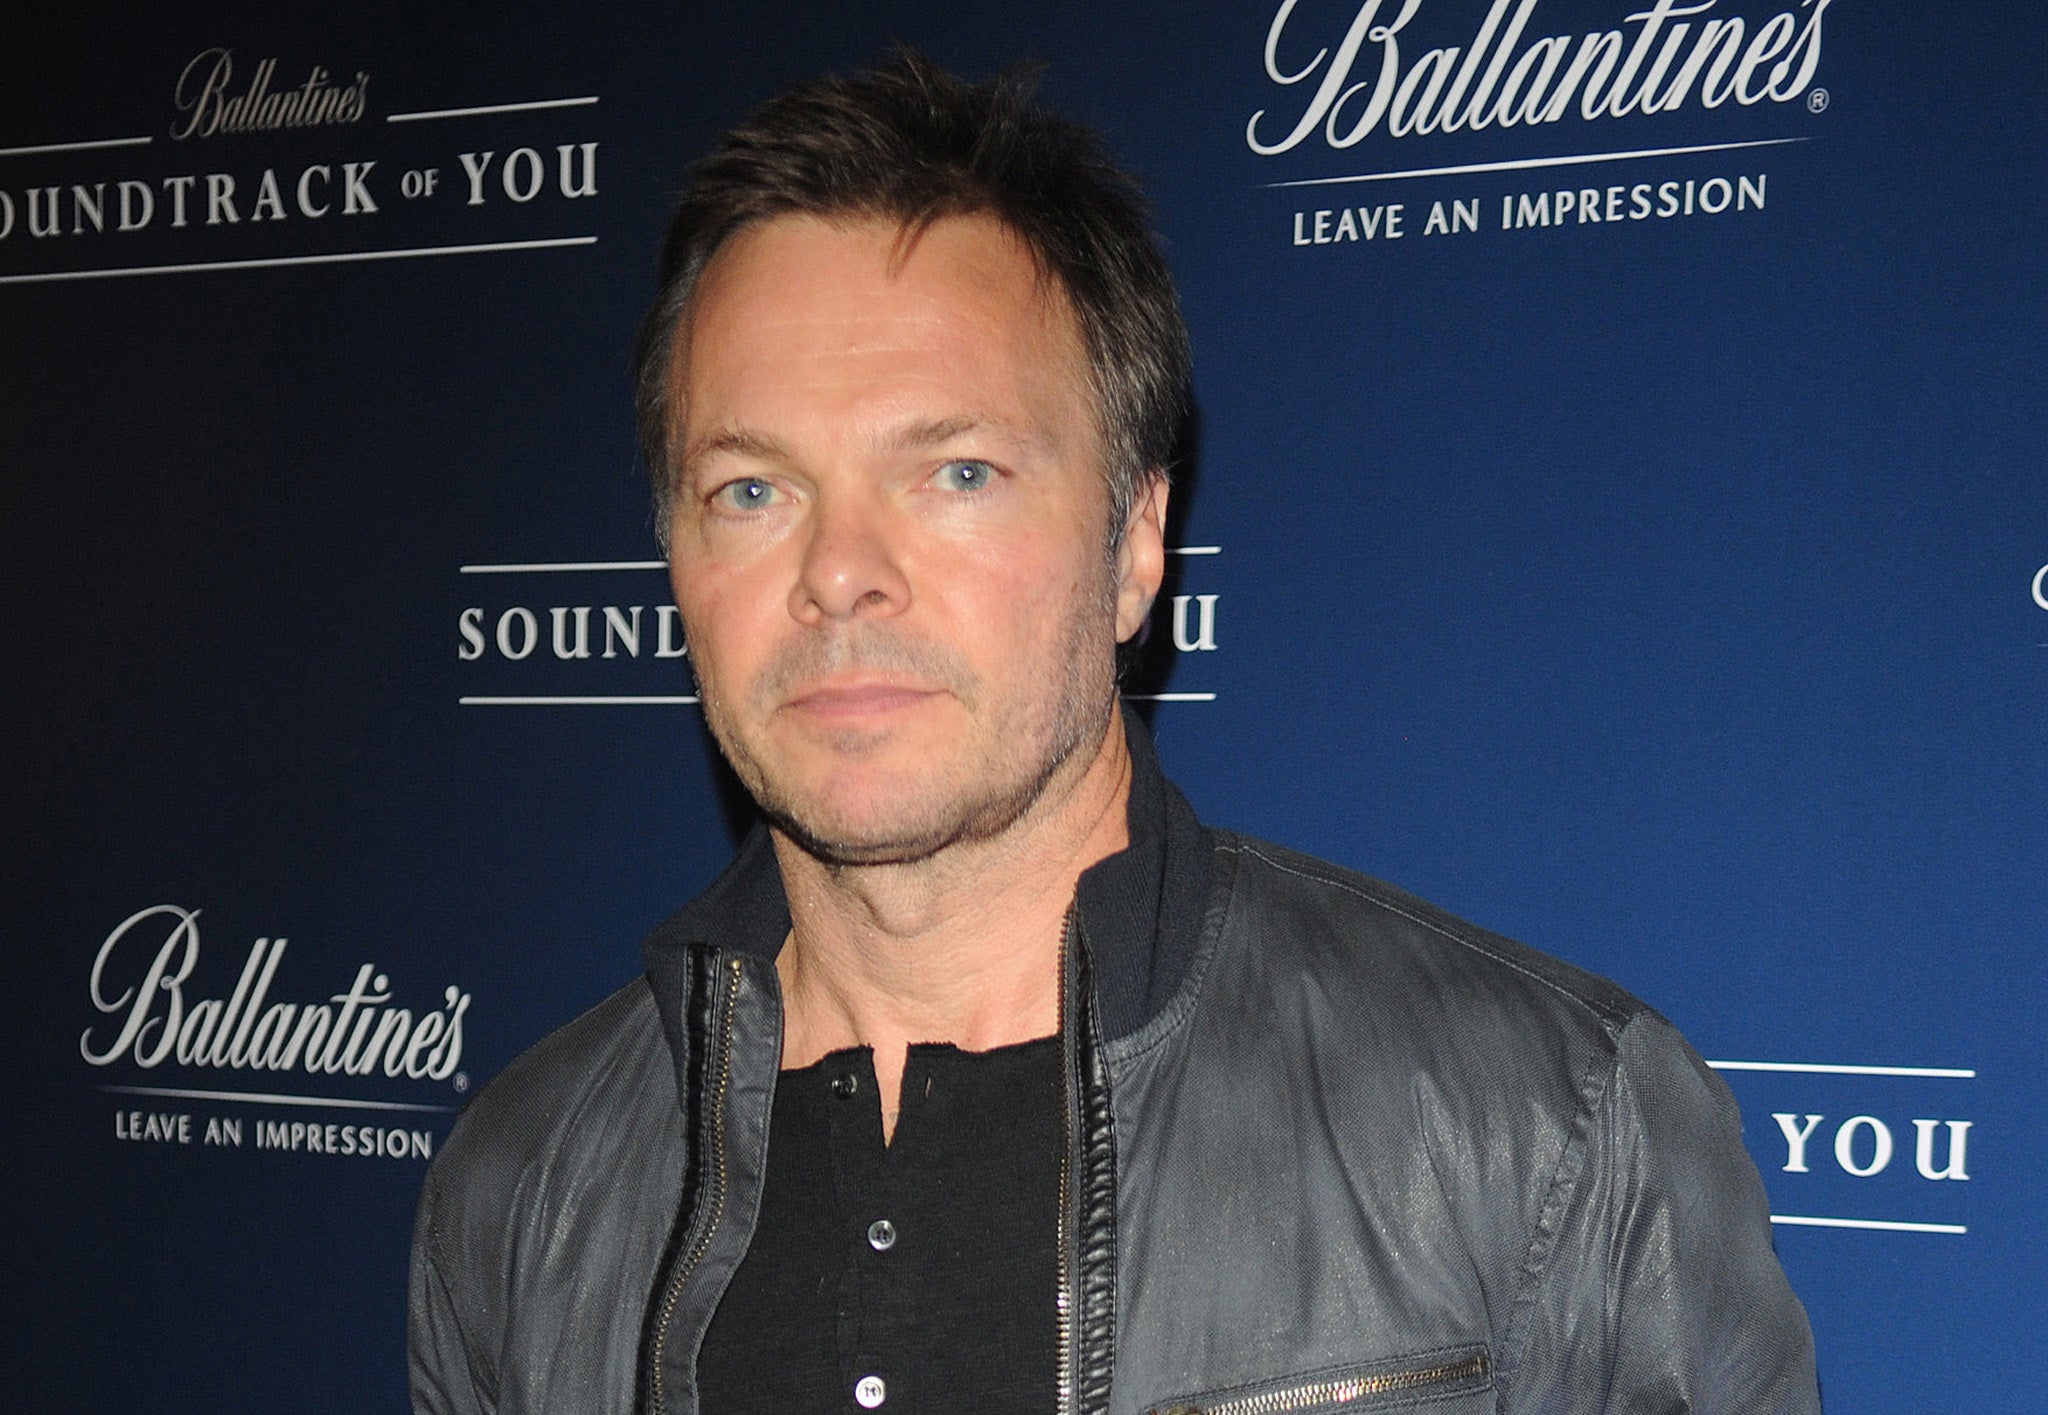 DJ and radio host Pete Tong has been awarded an MBE for his services to music and broadcasting